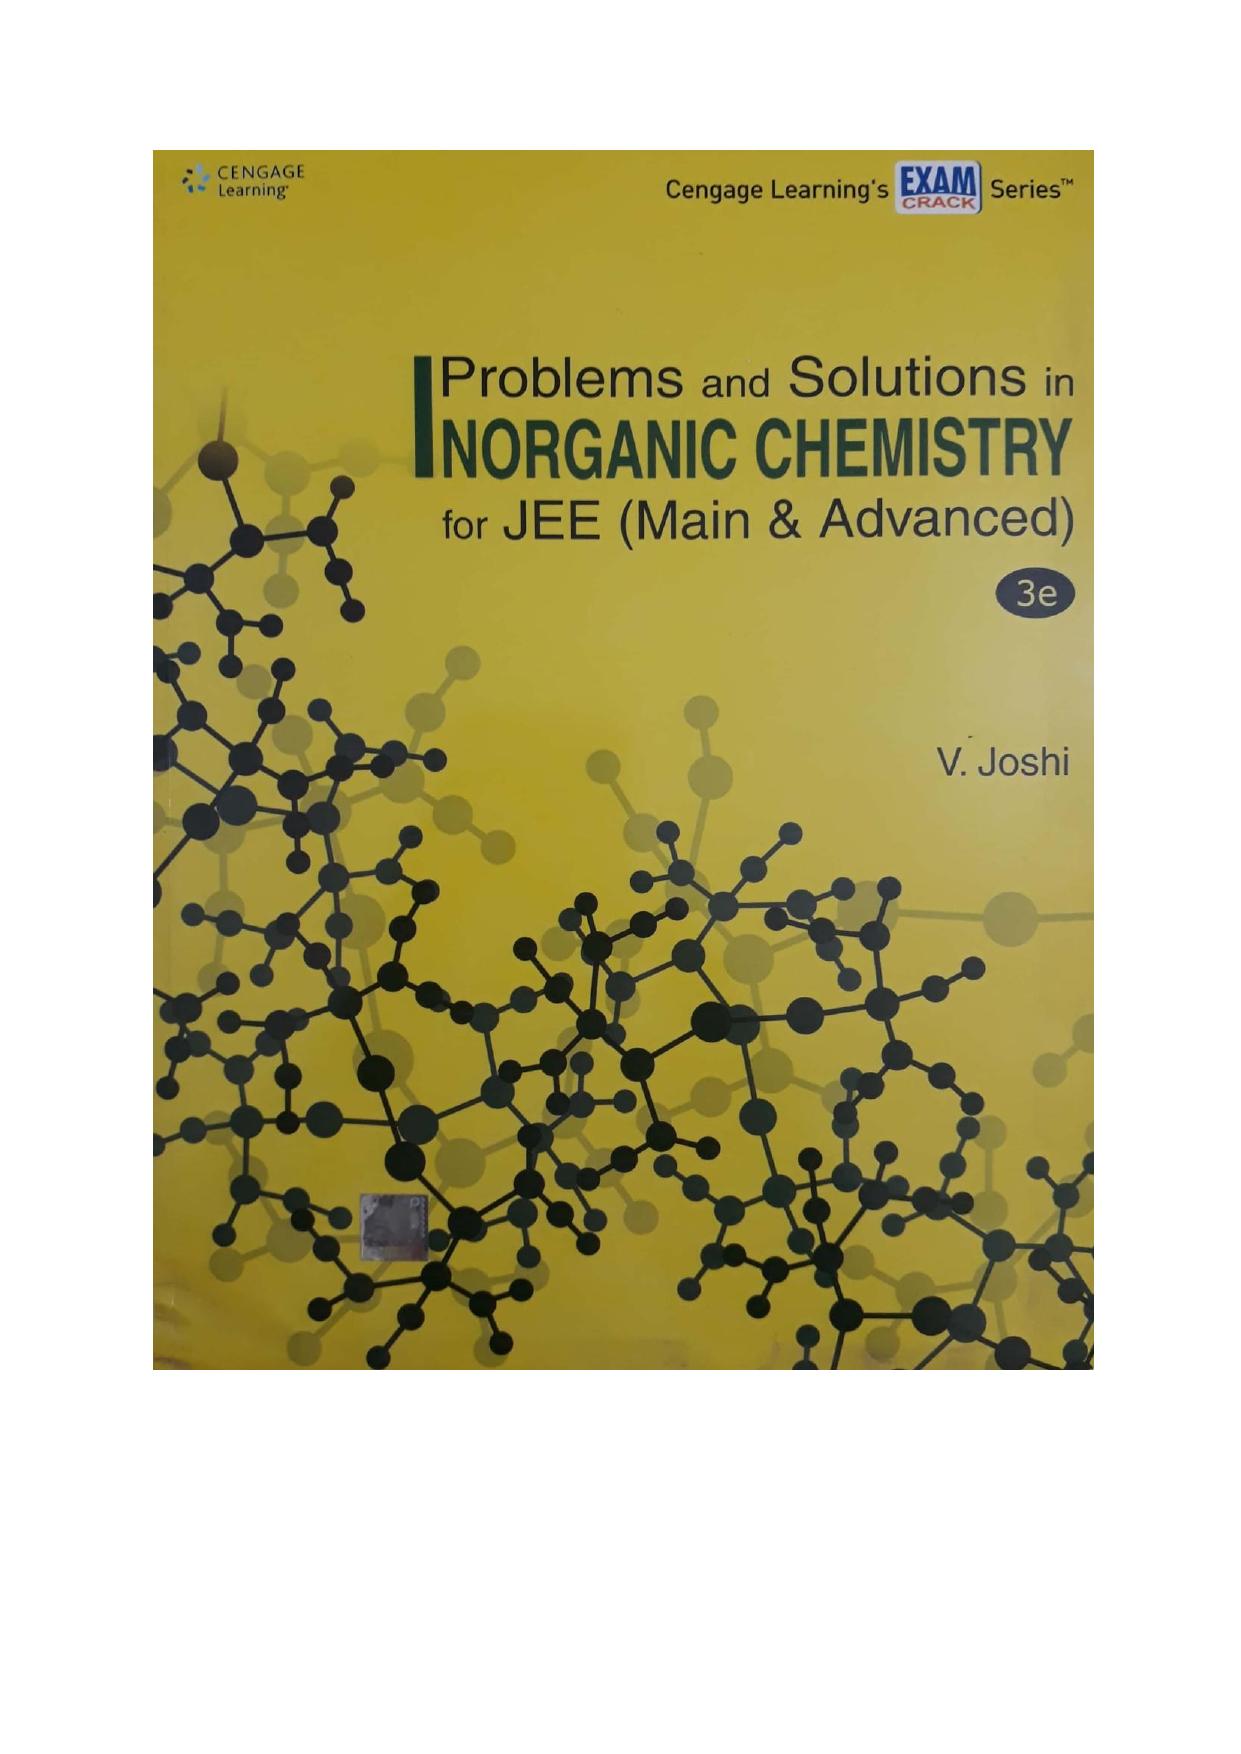 Problems and Solutions in Inorganic Chemistry